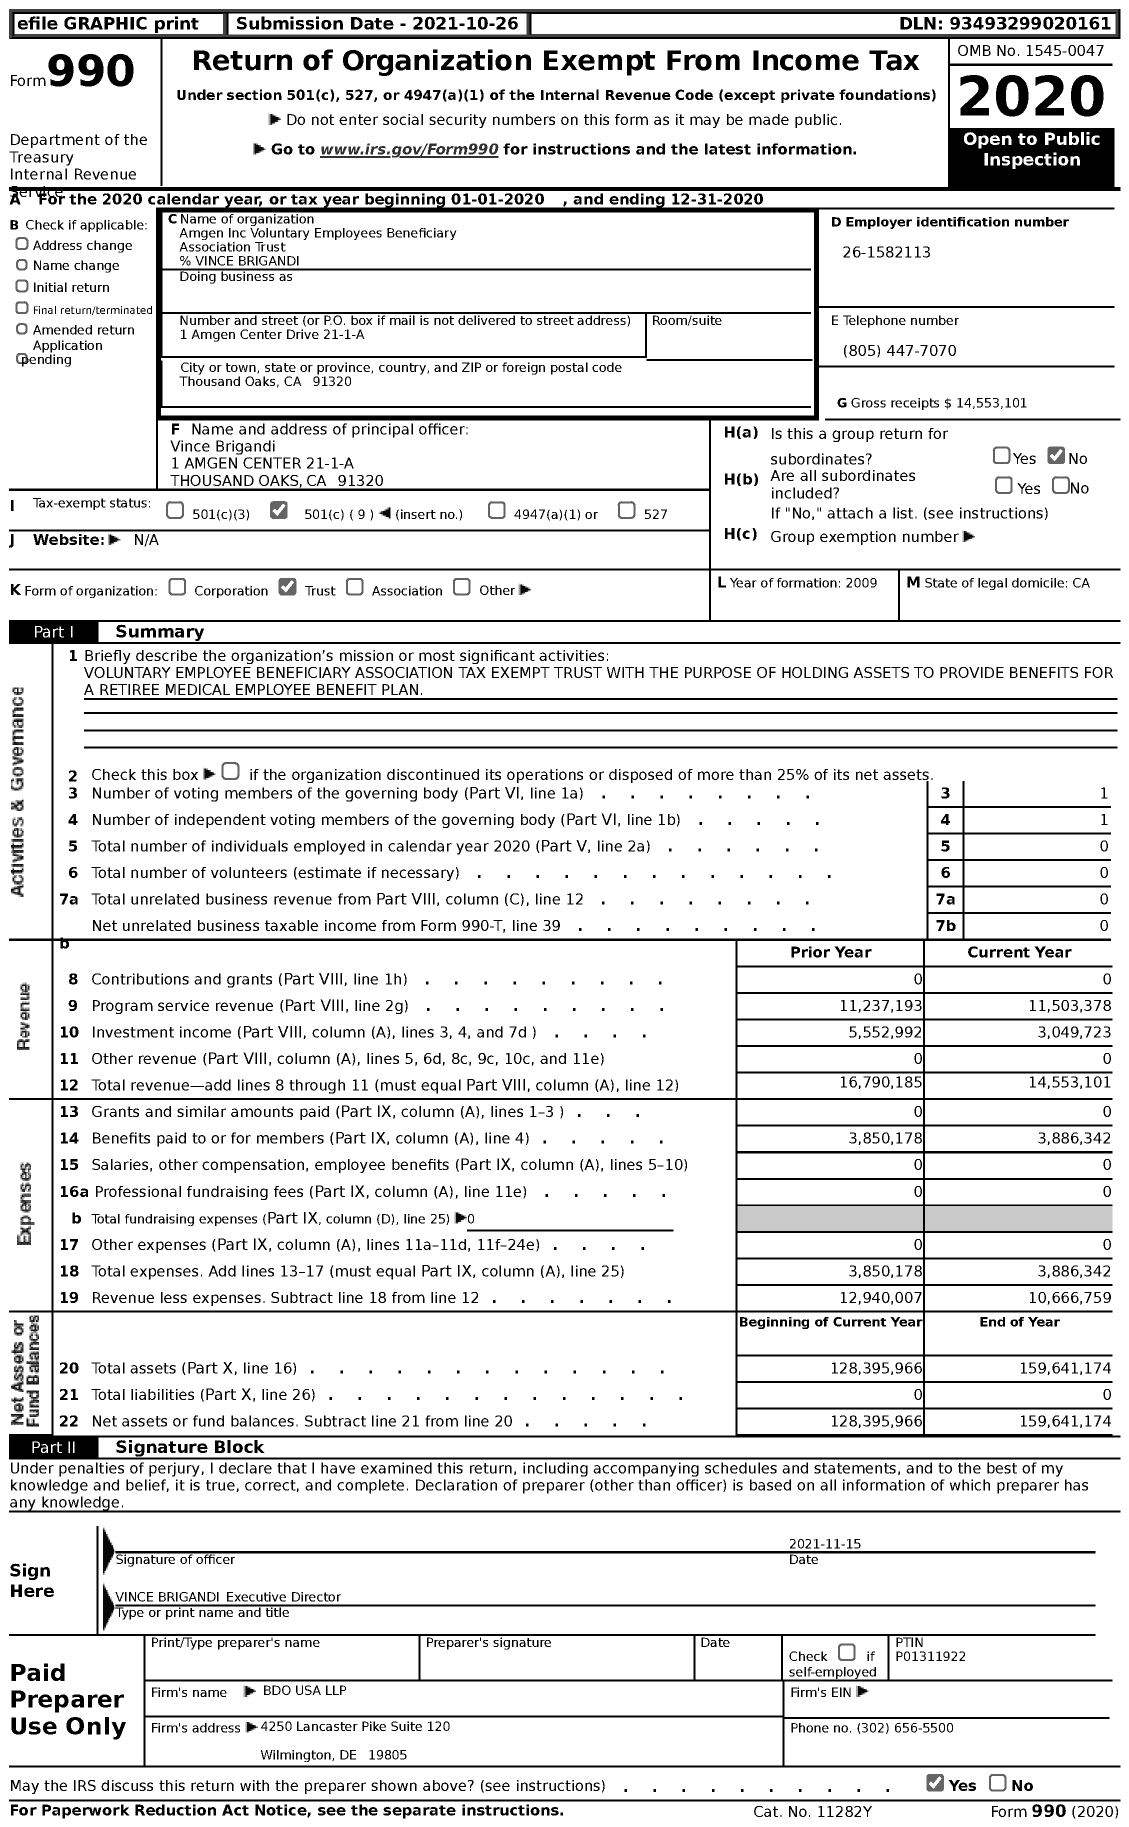 Image of first page of 2020 Form 990 for Amgen Voluntary Employees Beneficiary Association Trust